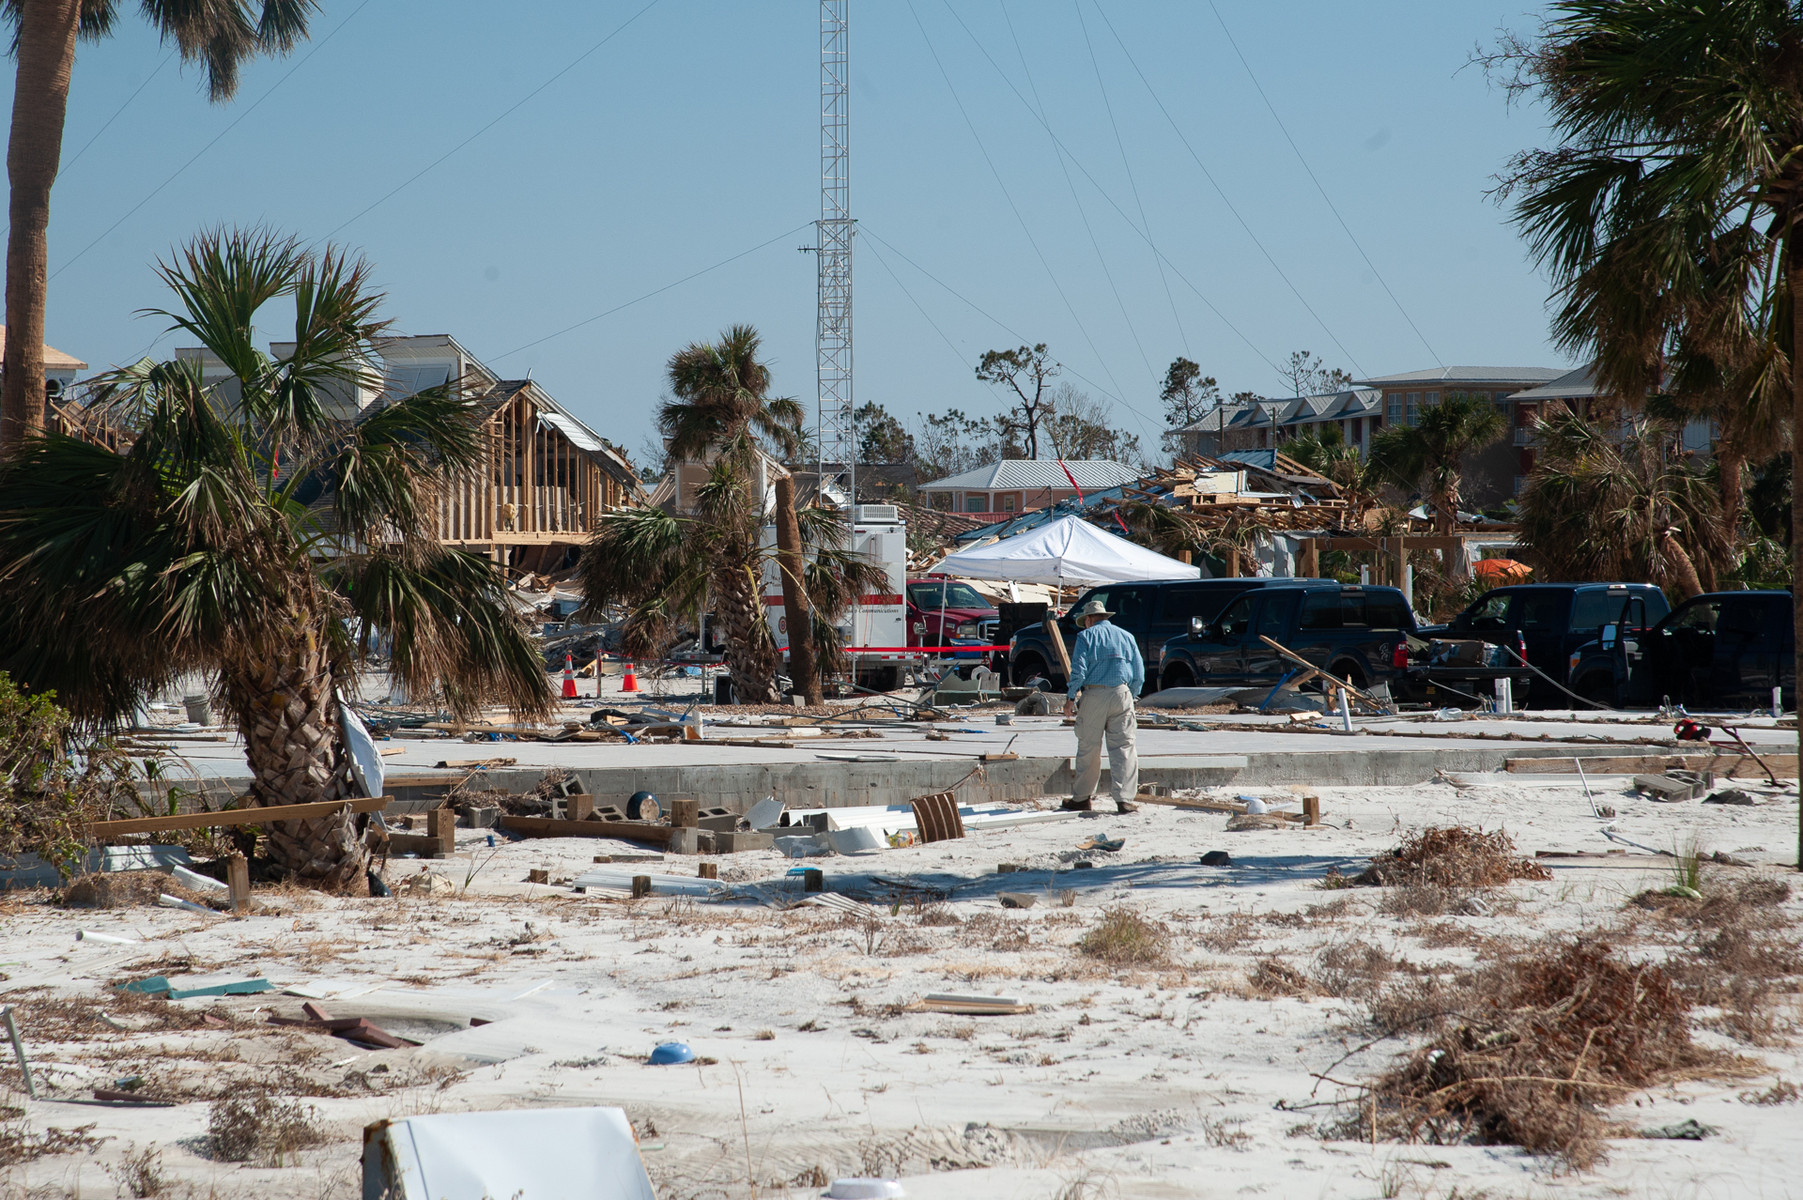 October 18, 2018 - Mexico Beach, FL - A man surveys what is left of his home in Mexico Beach, Florida after Hurricane Michael passed through the area on October 10, 2018. Florida.  The hurricane hit the Florida Panhandle as a category 5 storm causing massive damage and claimed the lives of more than a dozen people.